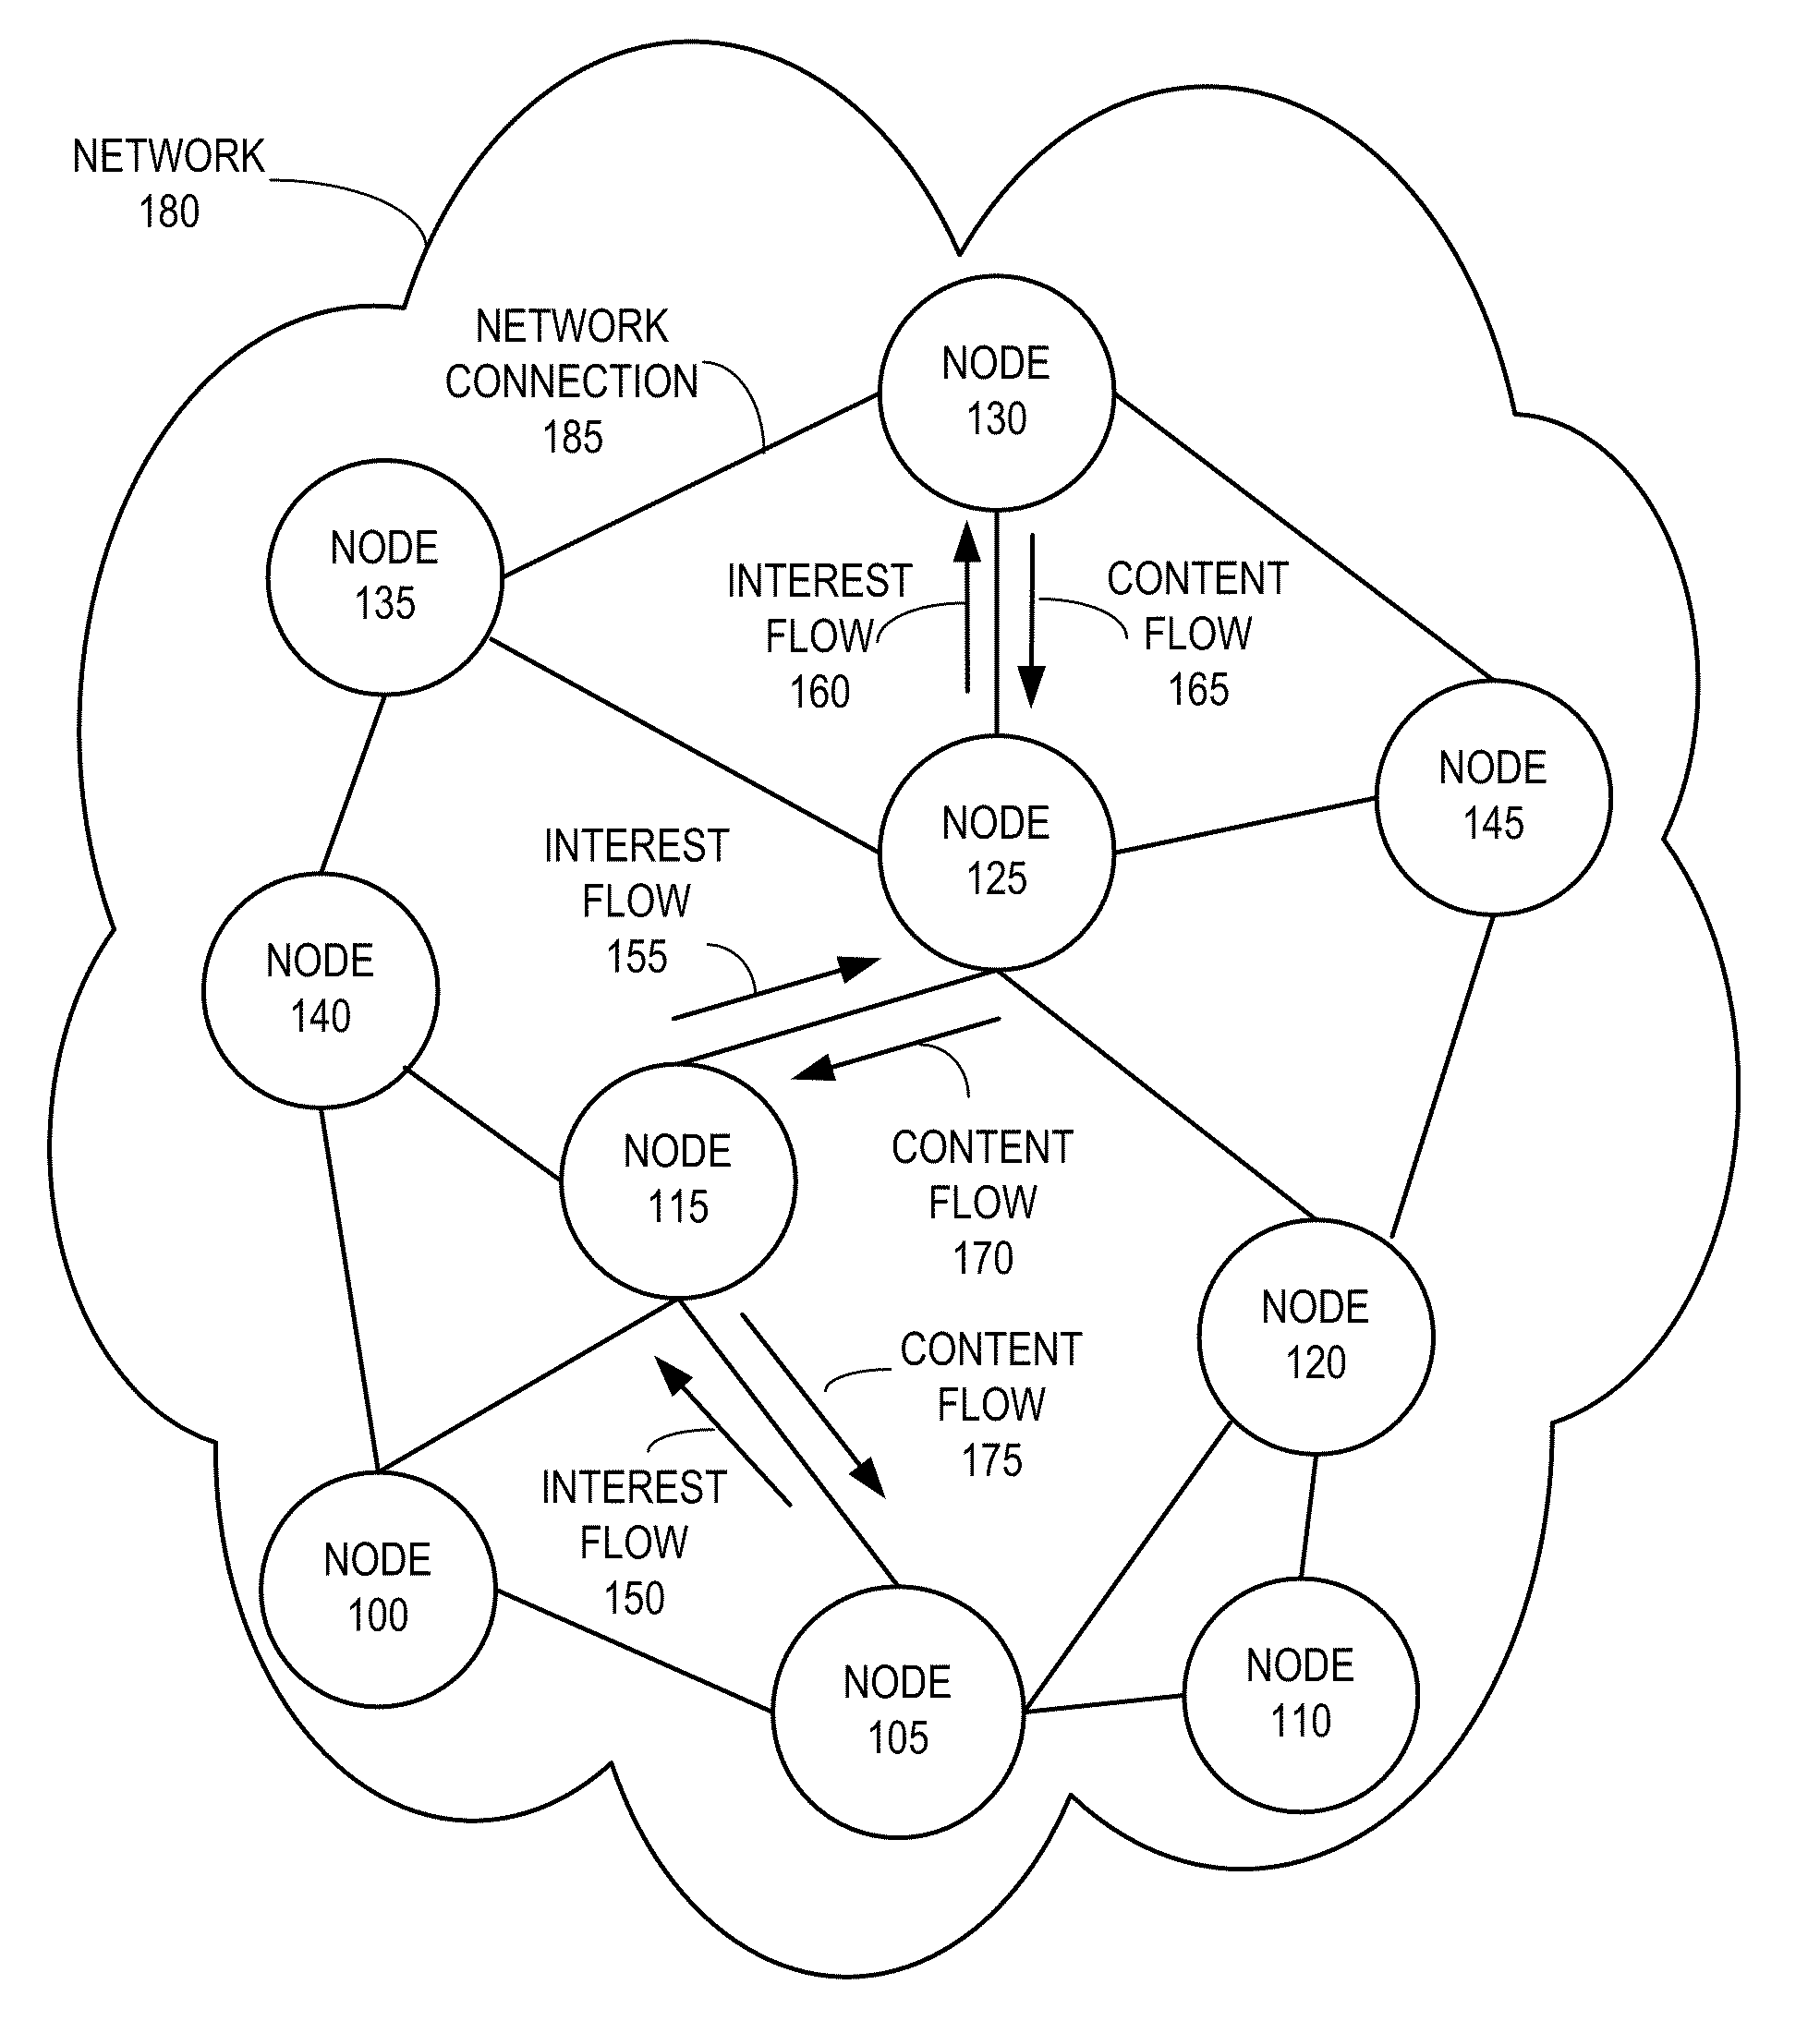 System for forwarding packets with hierarchically structured variable-length identifiers using an exact-match lookup engine